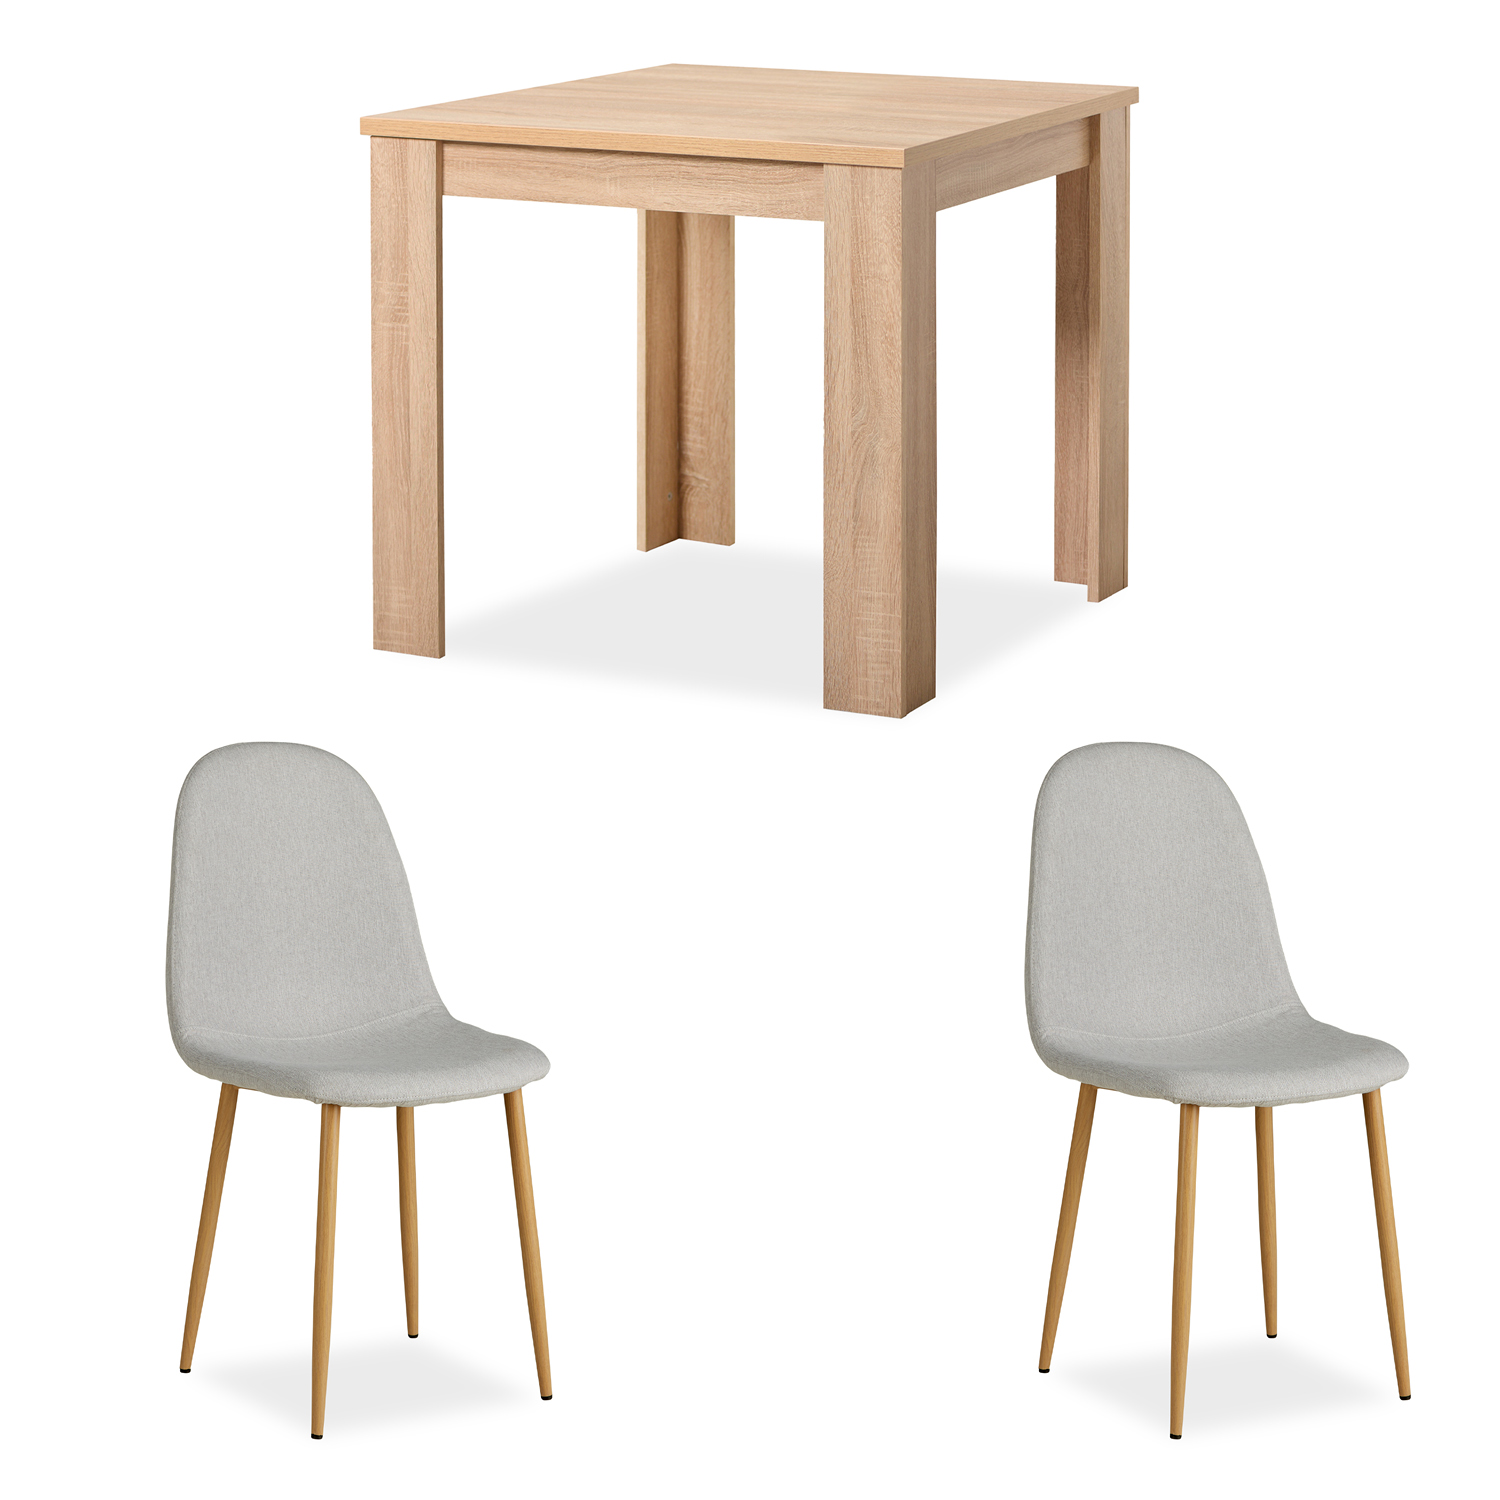 Modern Dining Table 80x80 cm with 2 Chairs Grey Dining Room Table Wooden Table Oak